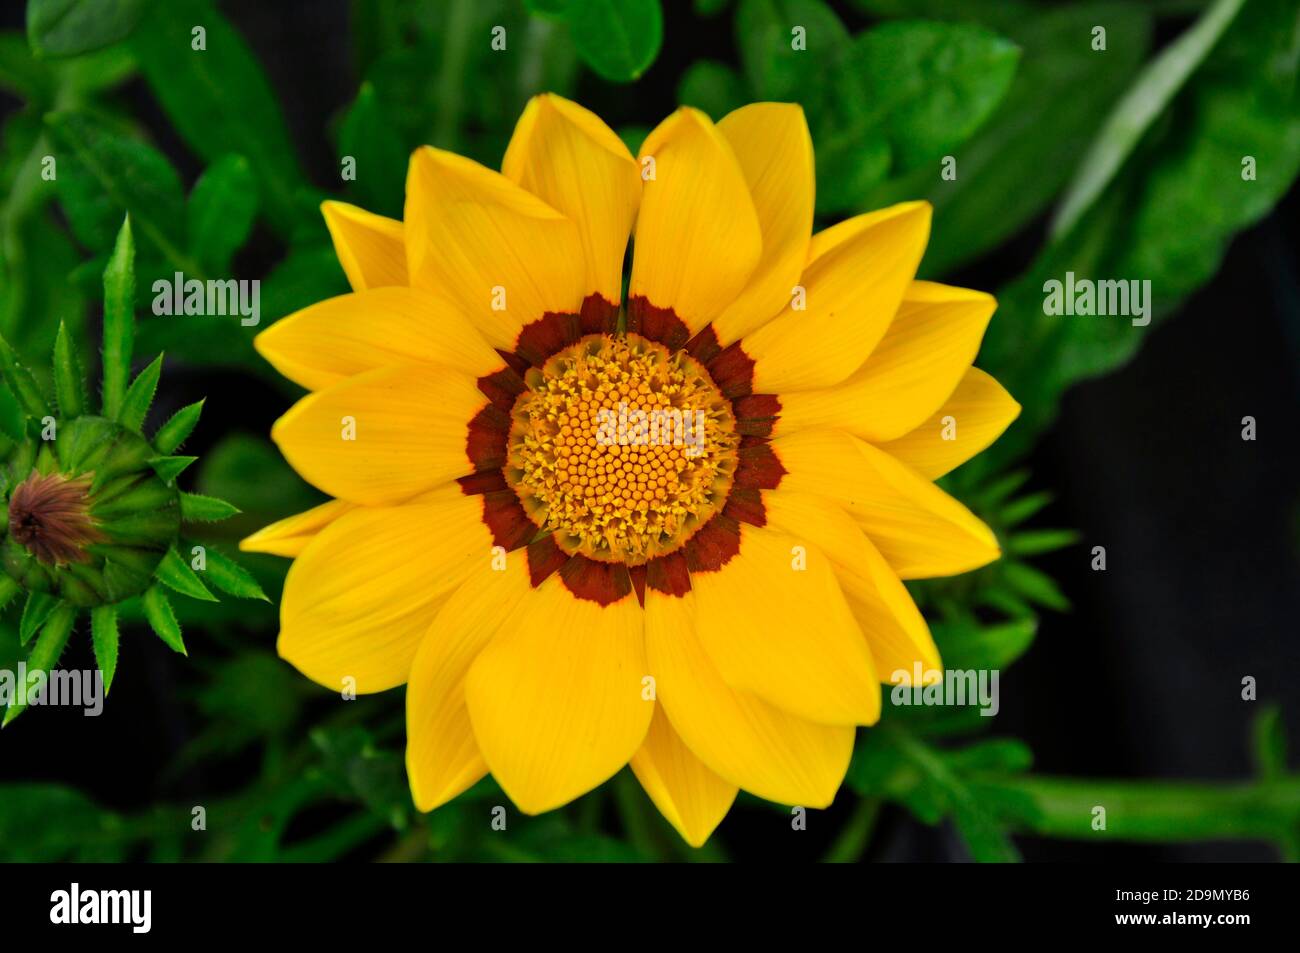 Flower, Close up of a member of the compositae family. yellow and brown petals with a yellow centre. In a Wiltshire garden.UK Stock Photo